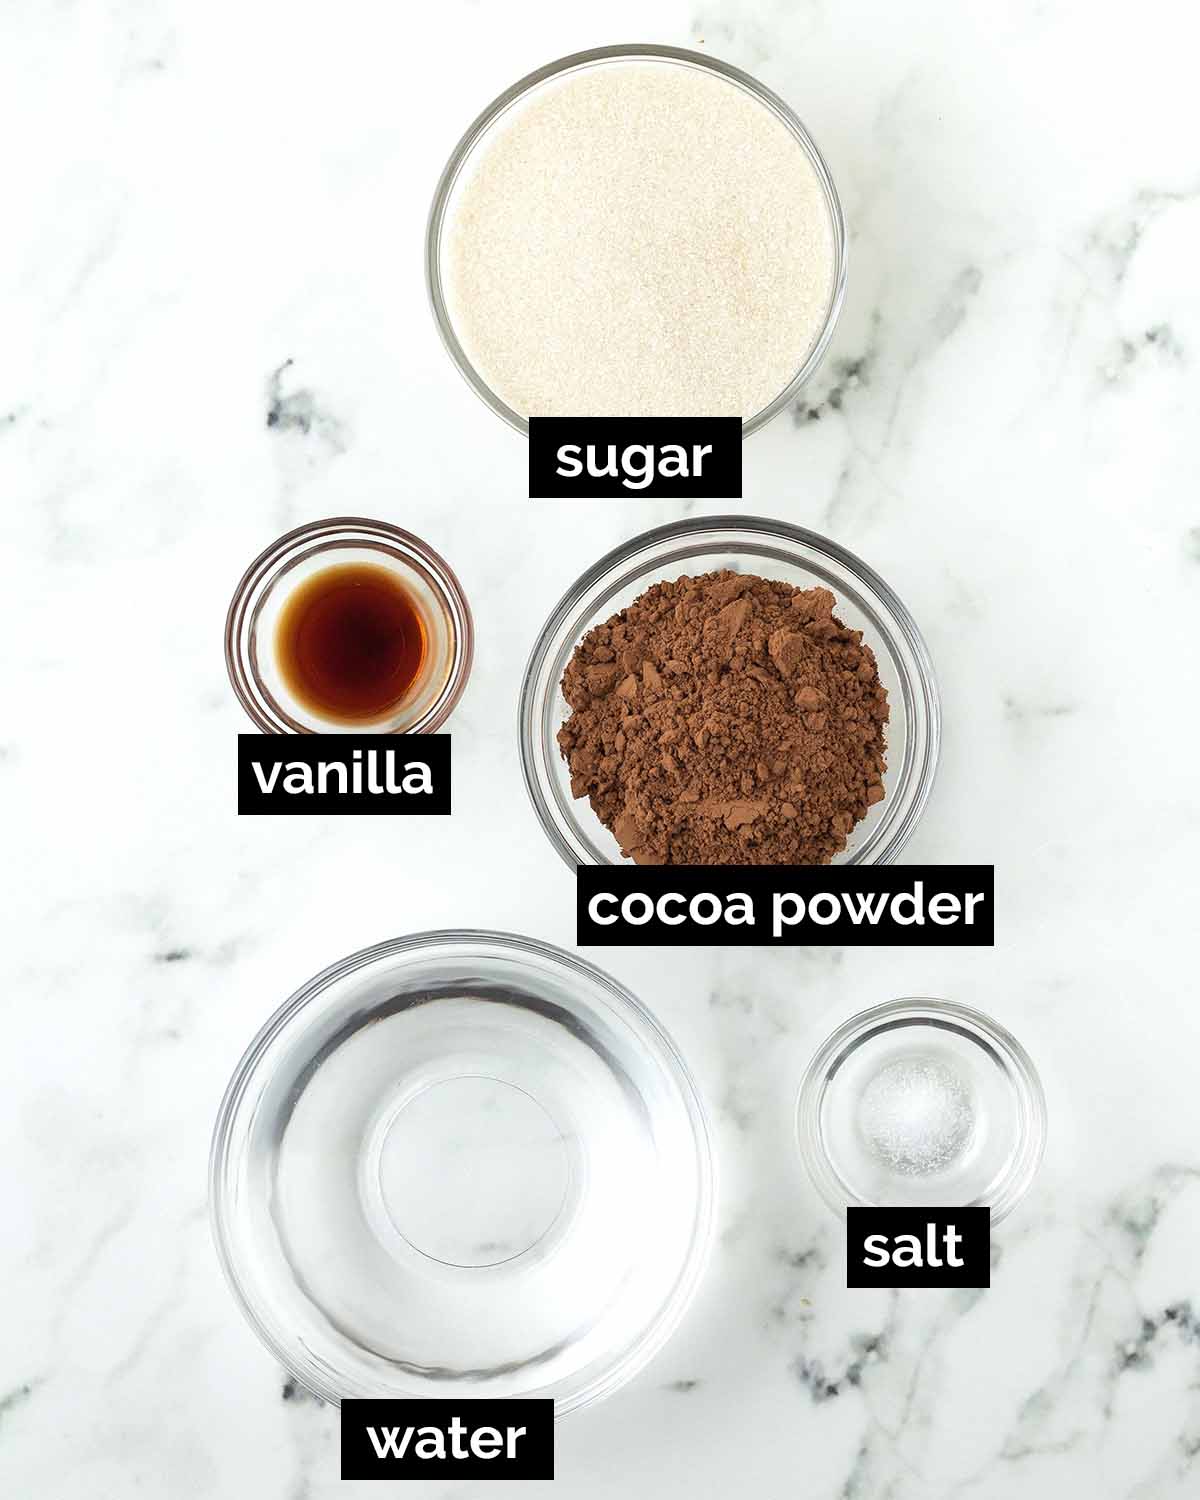 An overhead image showing the ingredients needed to make vegan chocolate syrup.